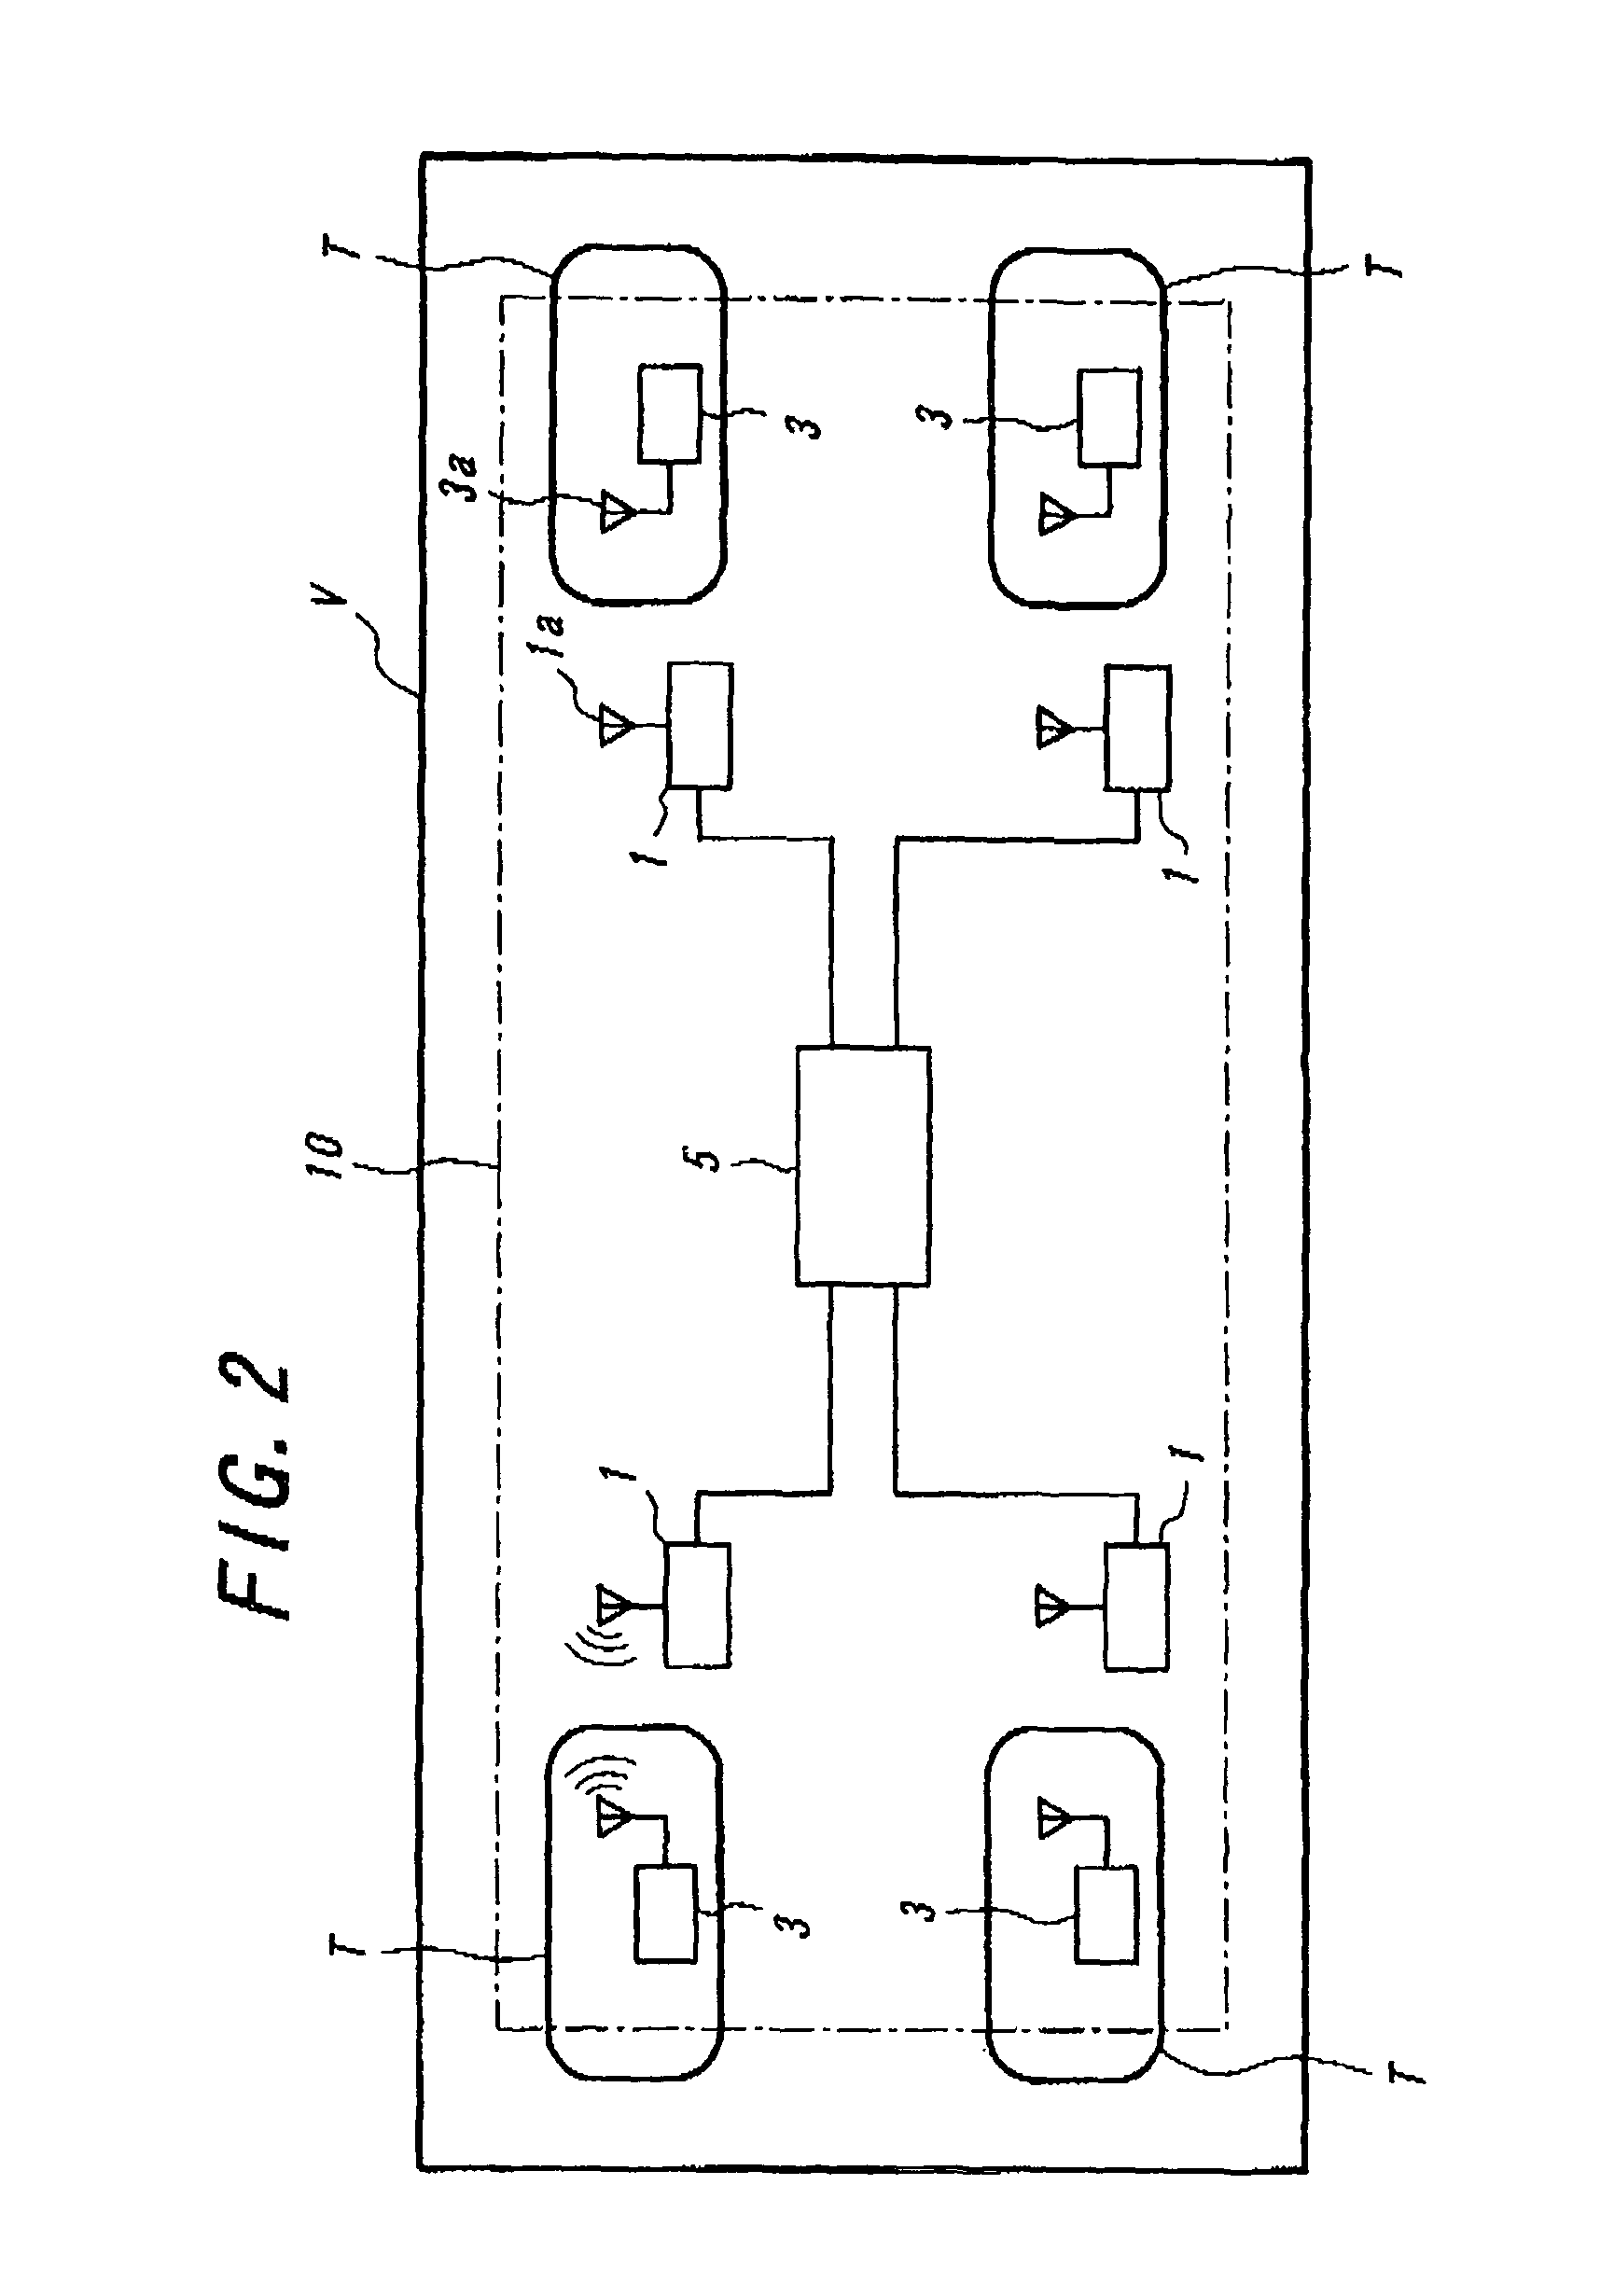 Tire management system with data demanding signal and tire status value transmitting at different cycles